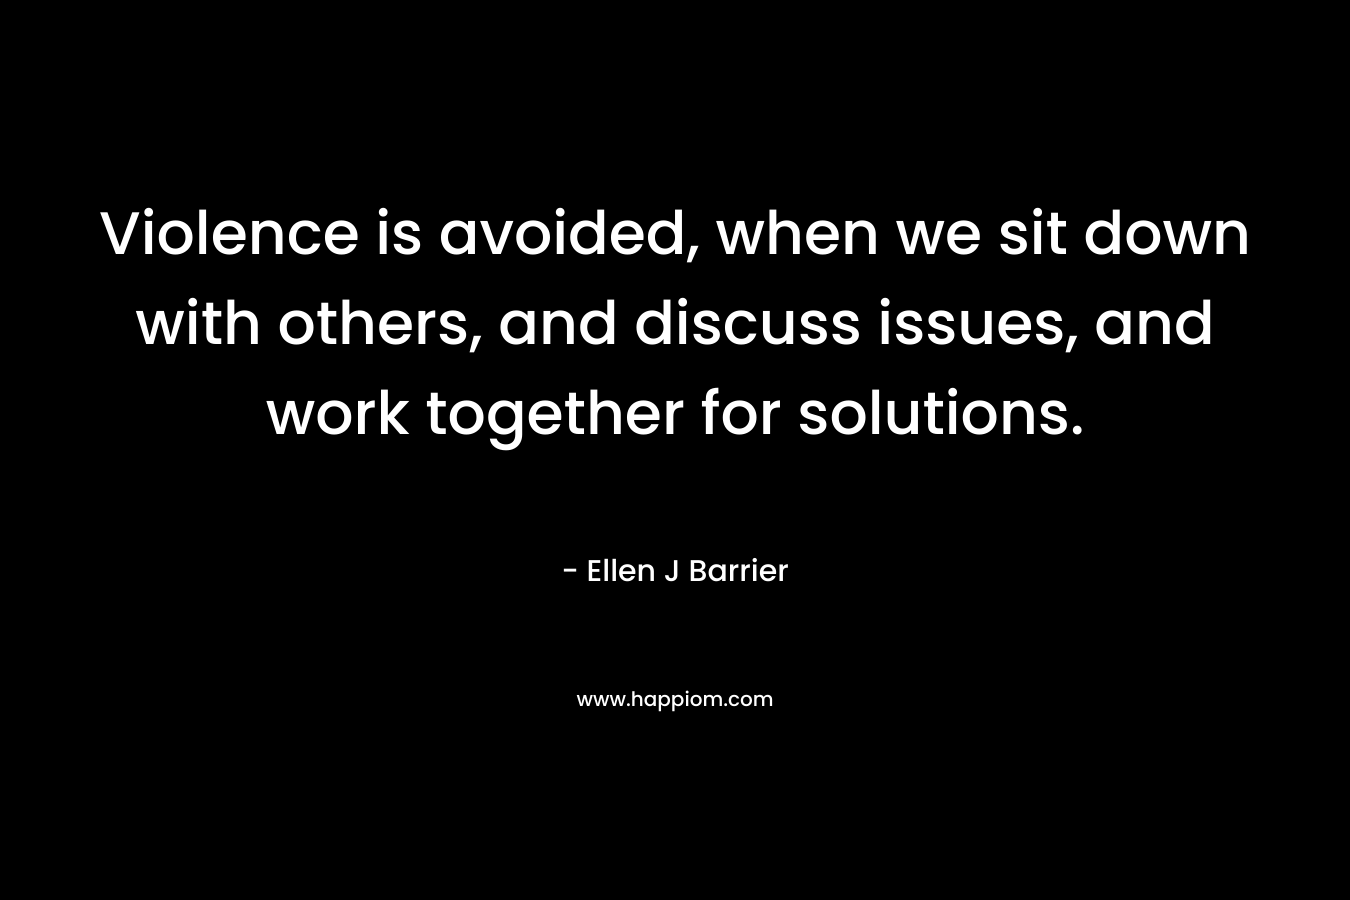 Violence is avoided, when we sit down with others, and discuss issues, and work together for solutions. – Ellen J Barrier